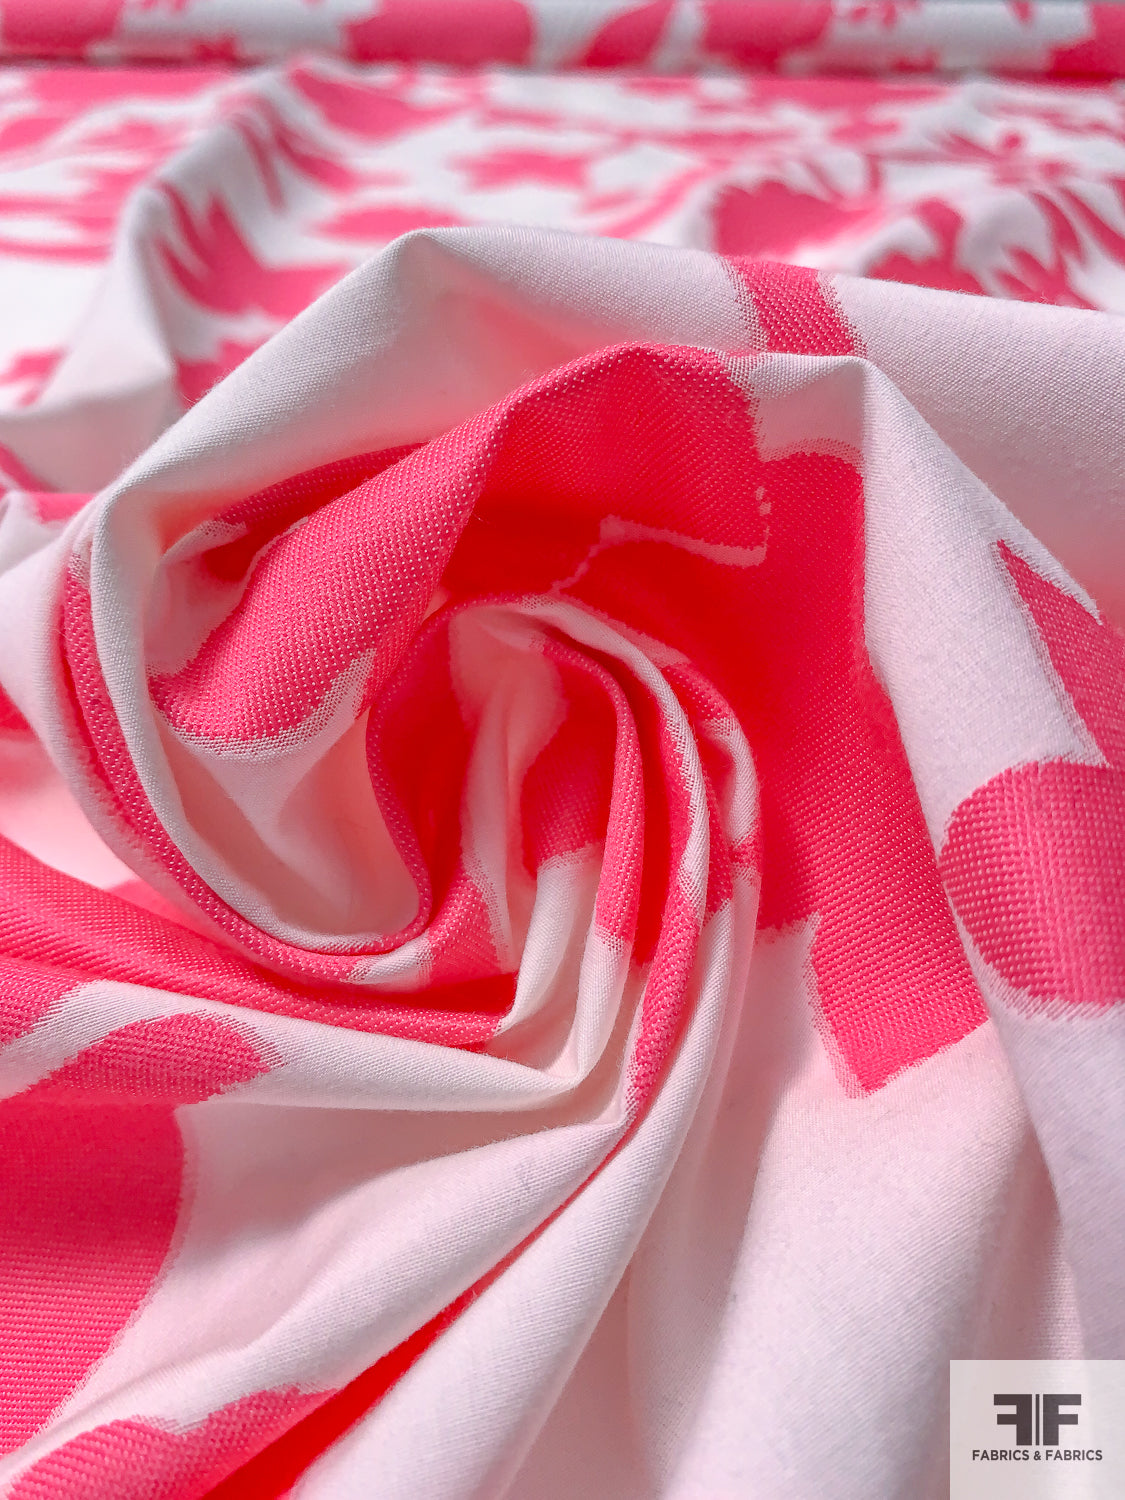 Italian Floral Silhouette Jacquard-Weave Yarn-Dyed Cotton - Bright Pink / Off-White